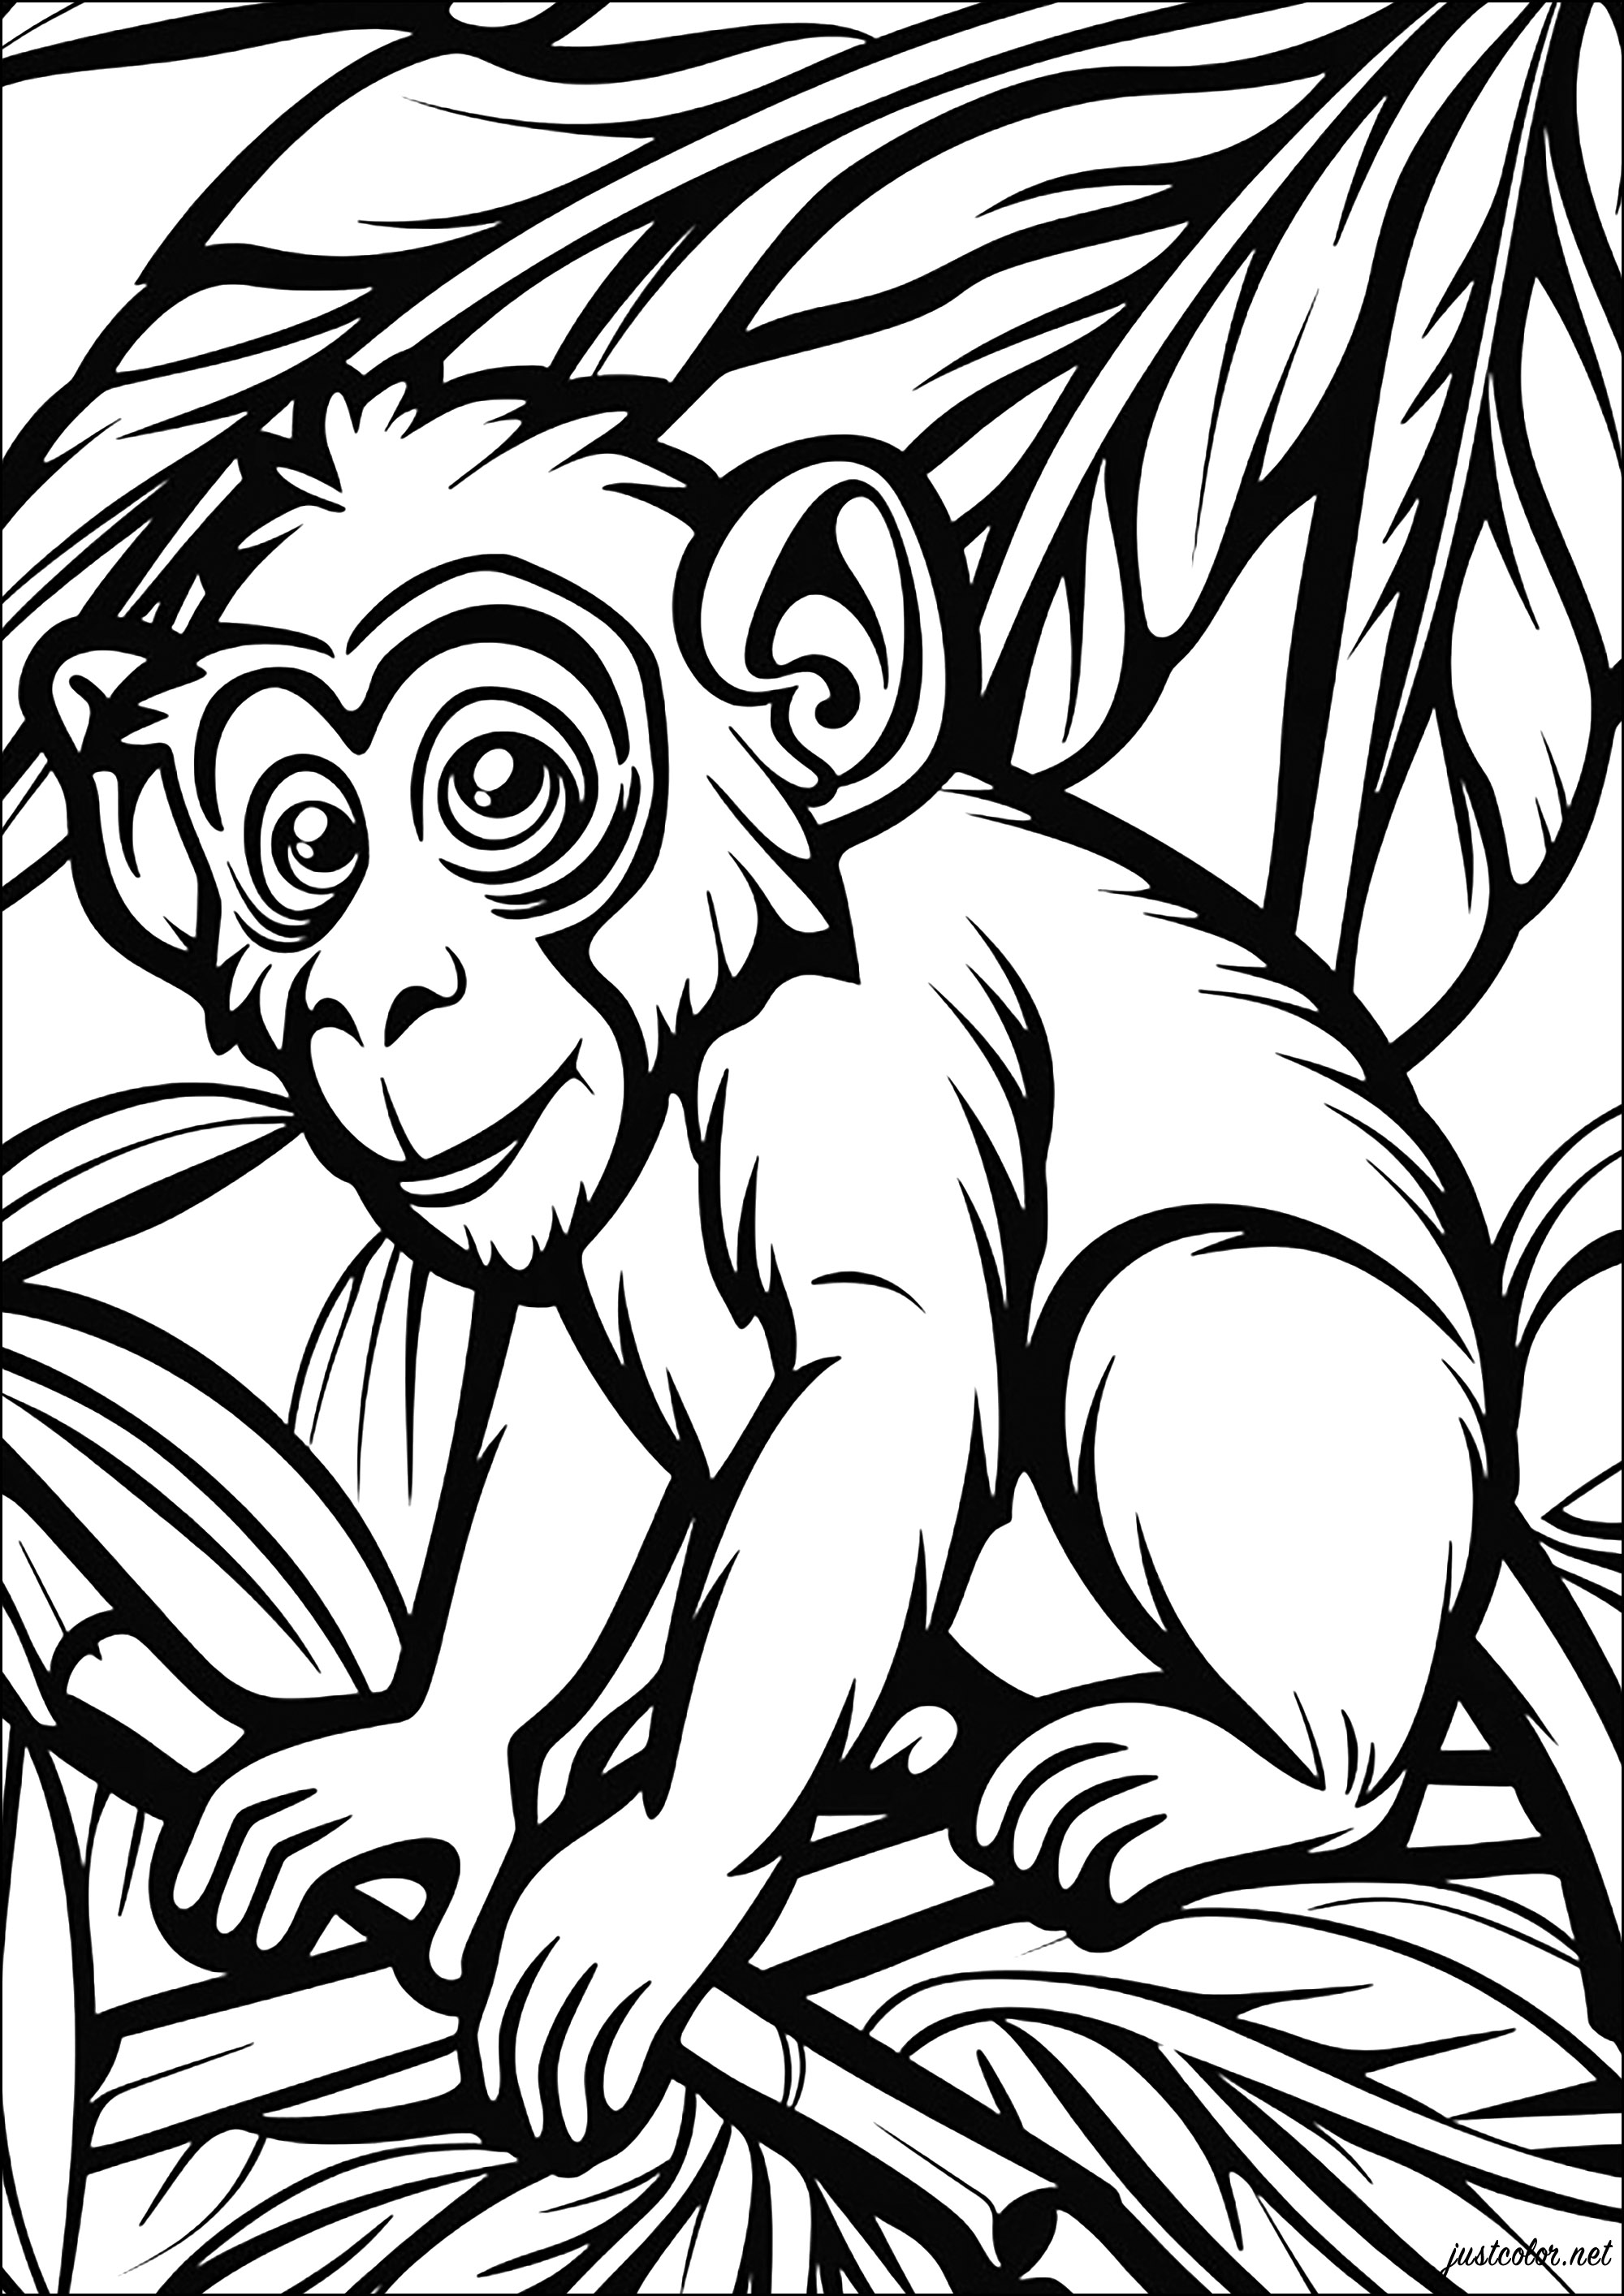 Little monkey in the jungle. A coloring page with thick lines that will transport you to the jungle!